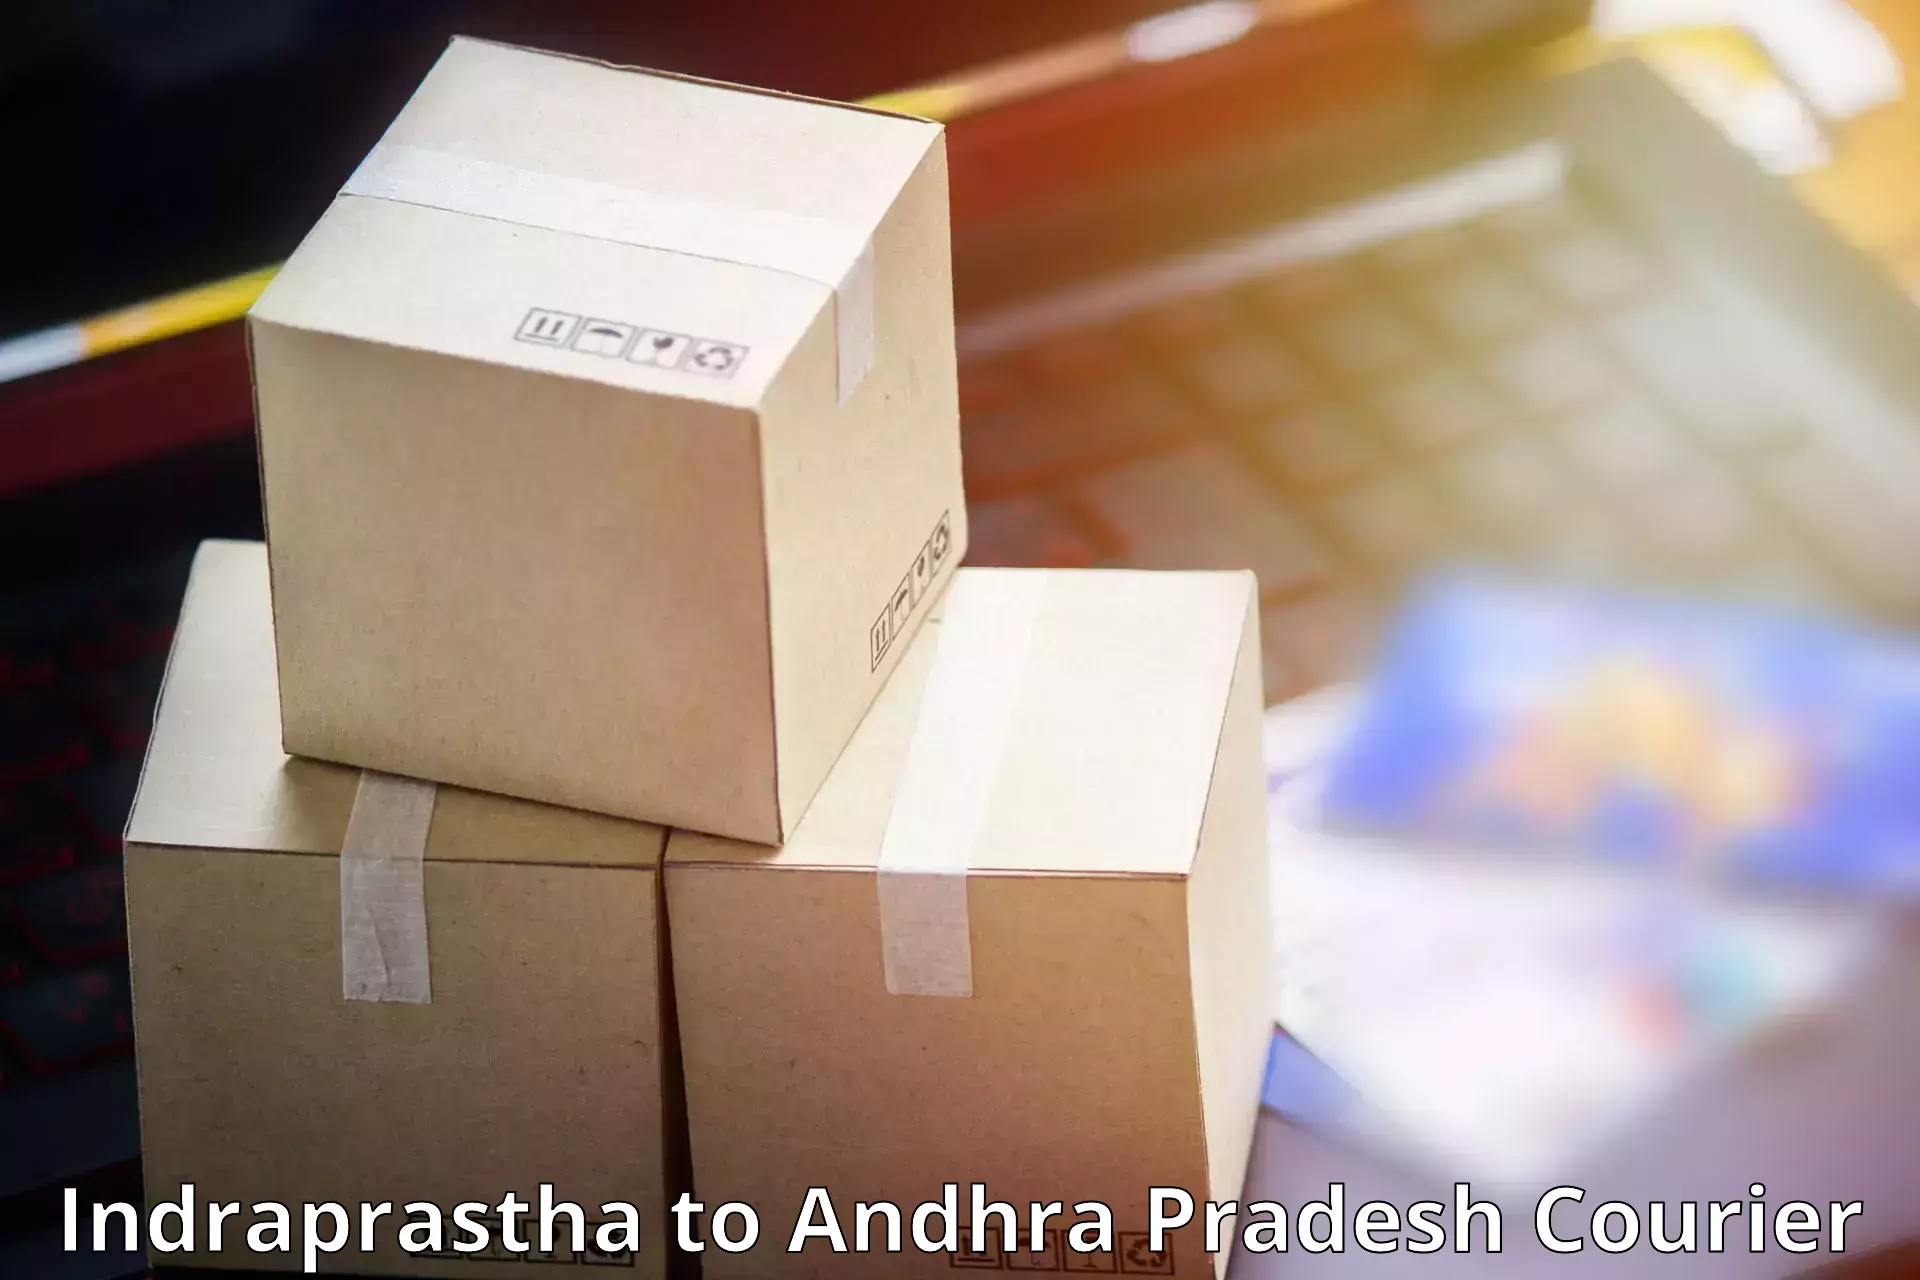 Express delivery network Indraprastha to Sirvella